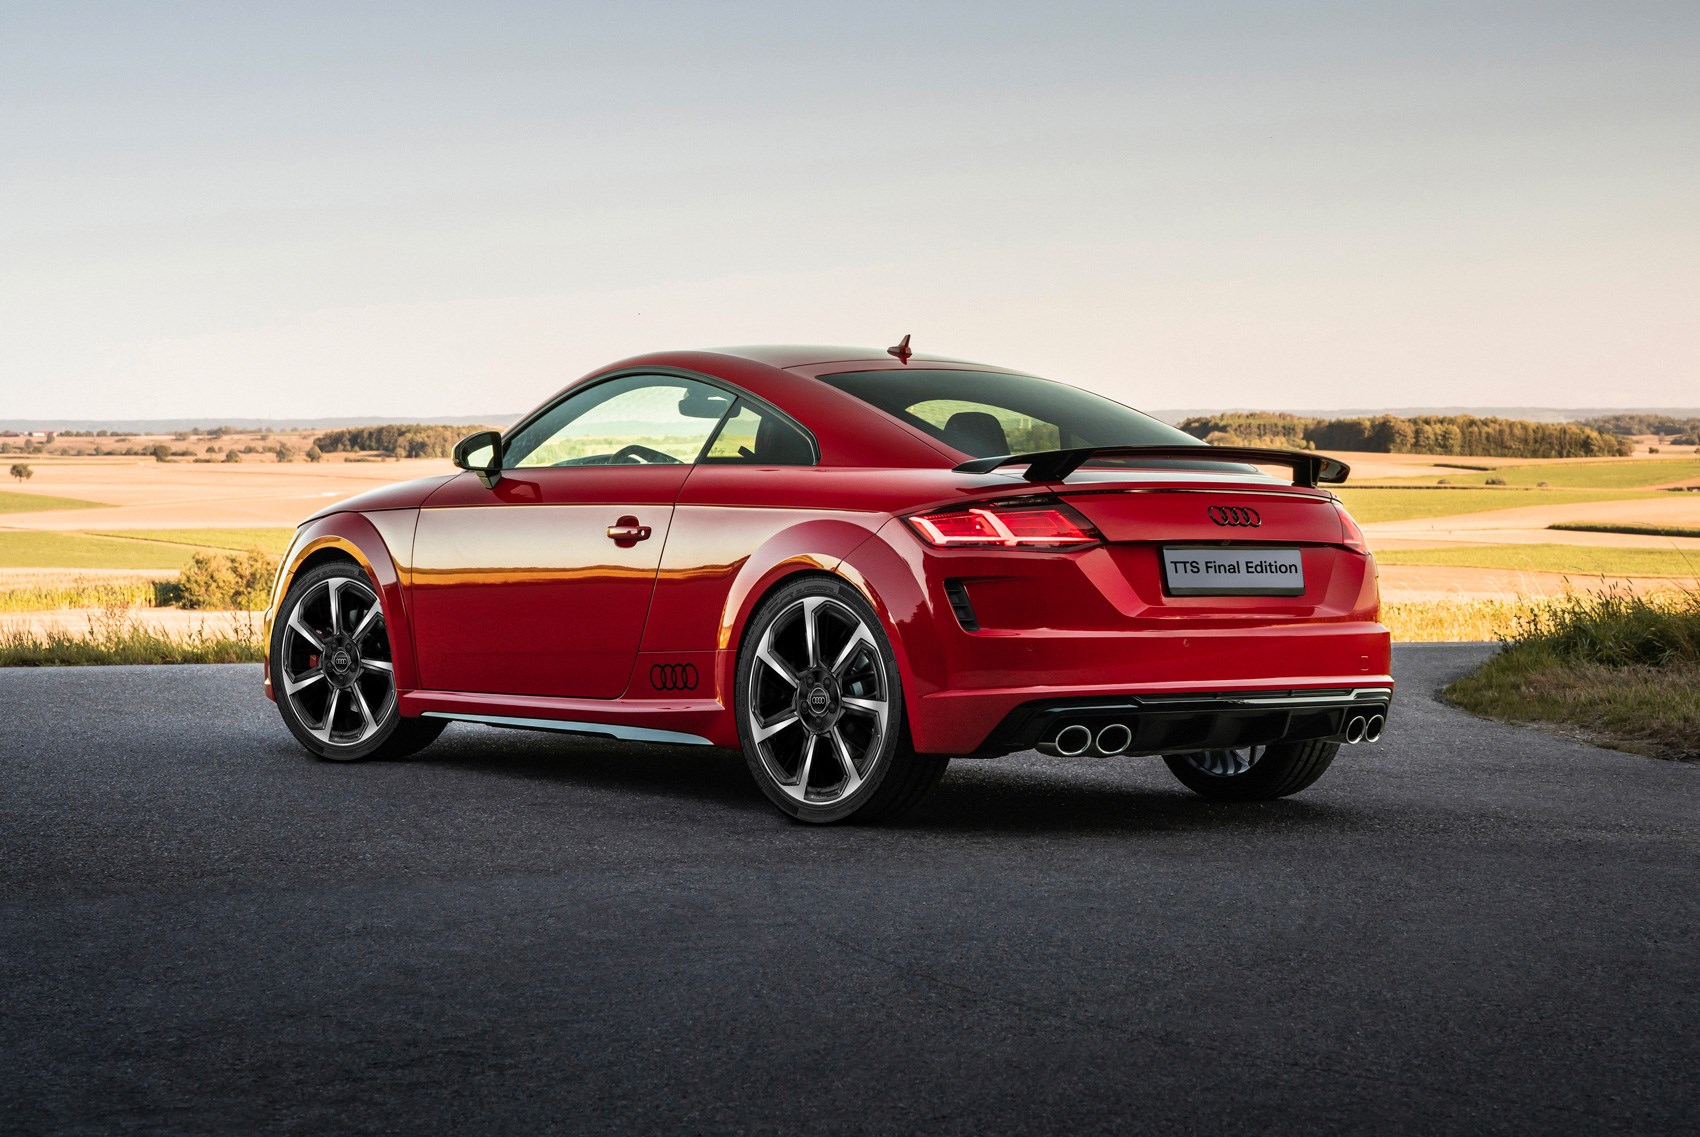 Is the Iconic Audi TT still a great sports car? (full review